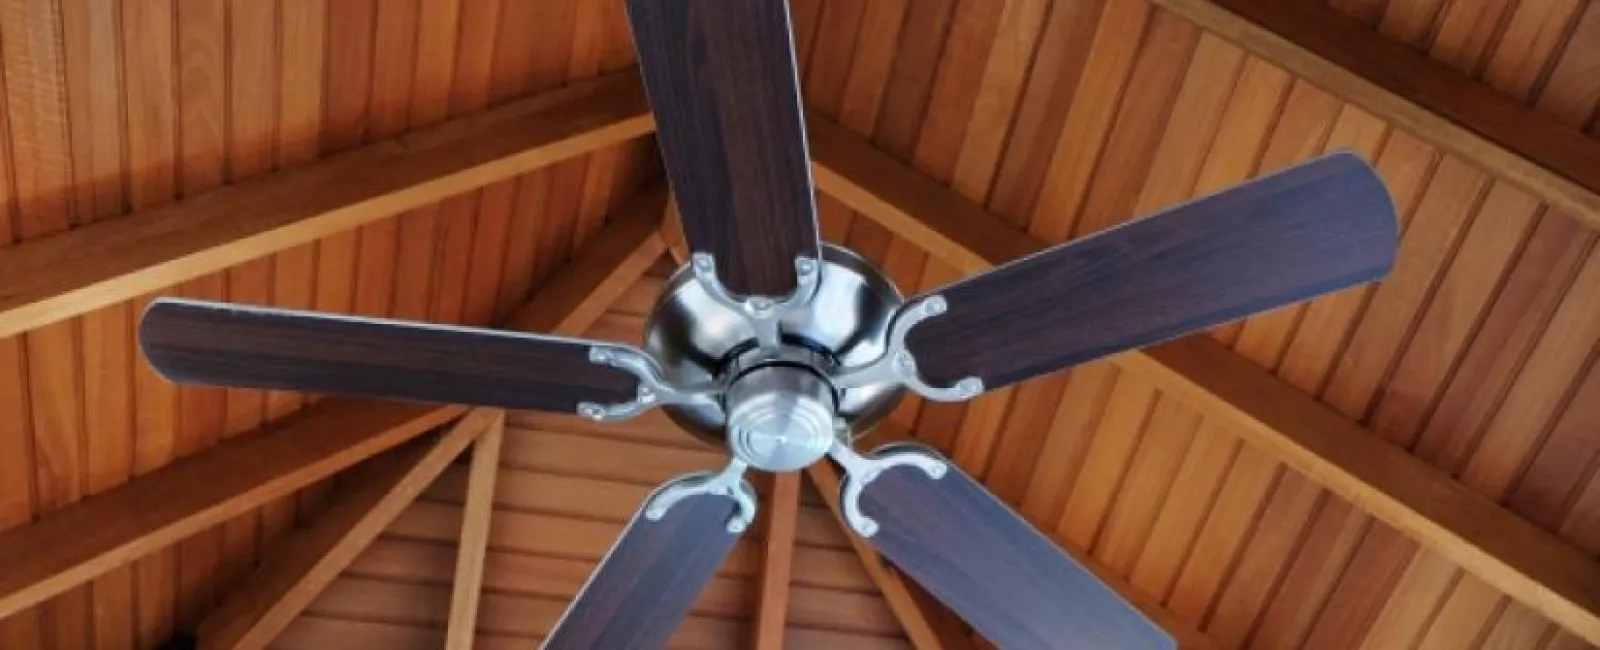 Answers to Your Ceiling Fan Questions